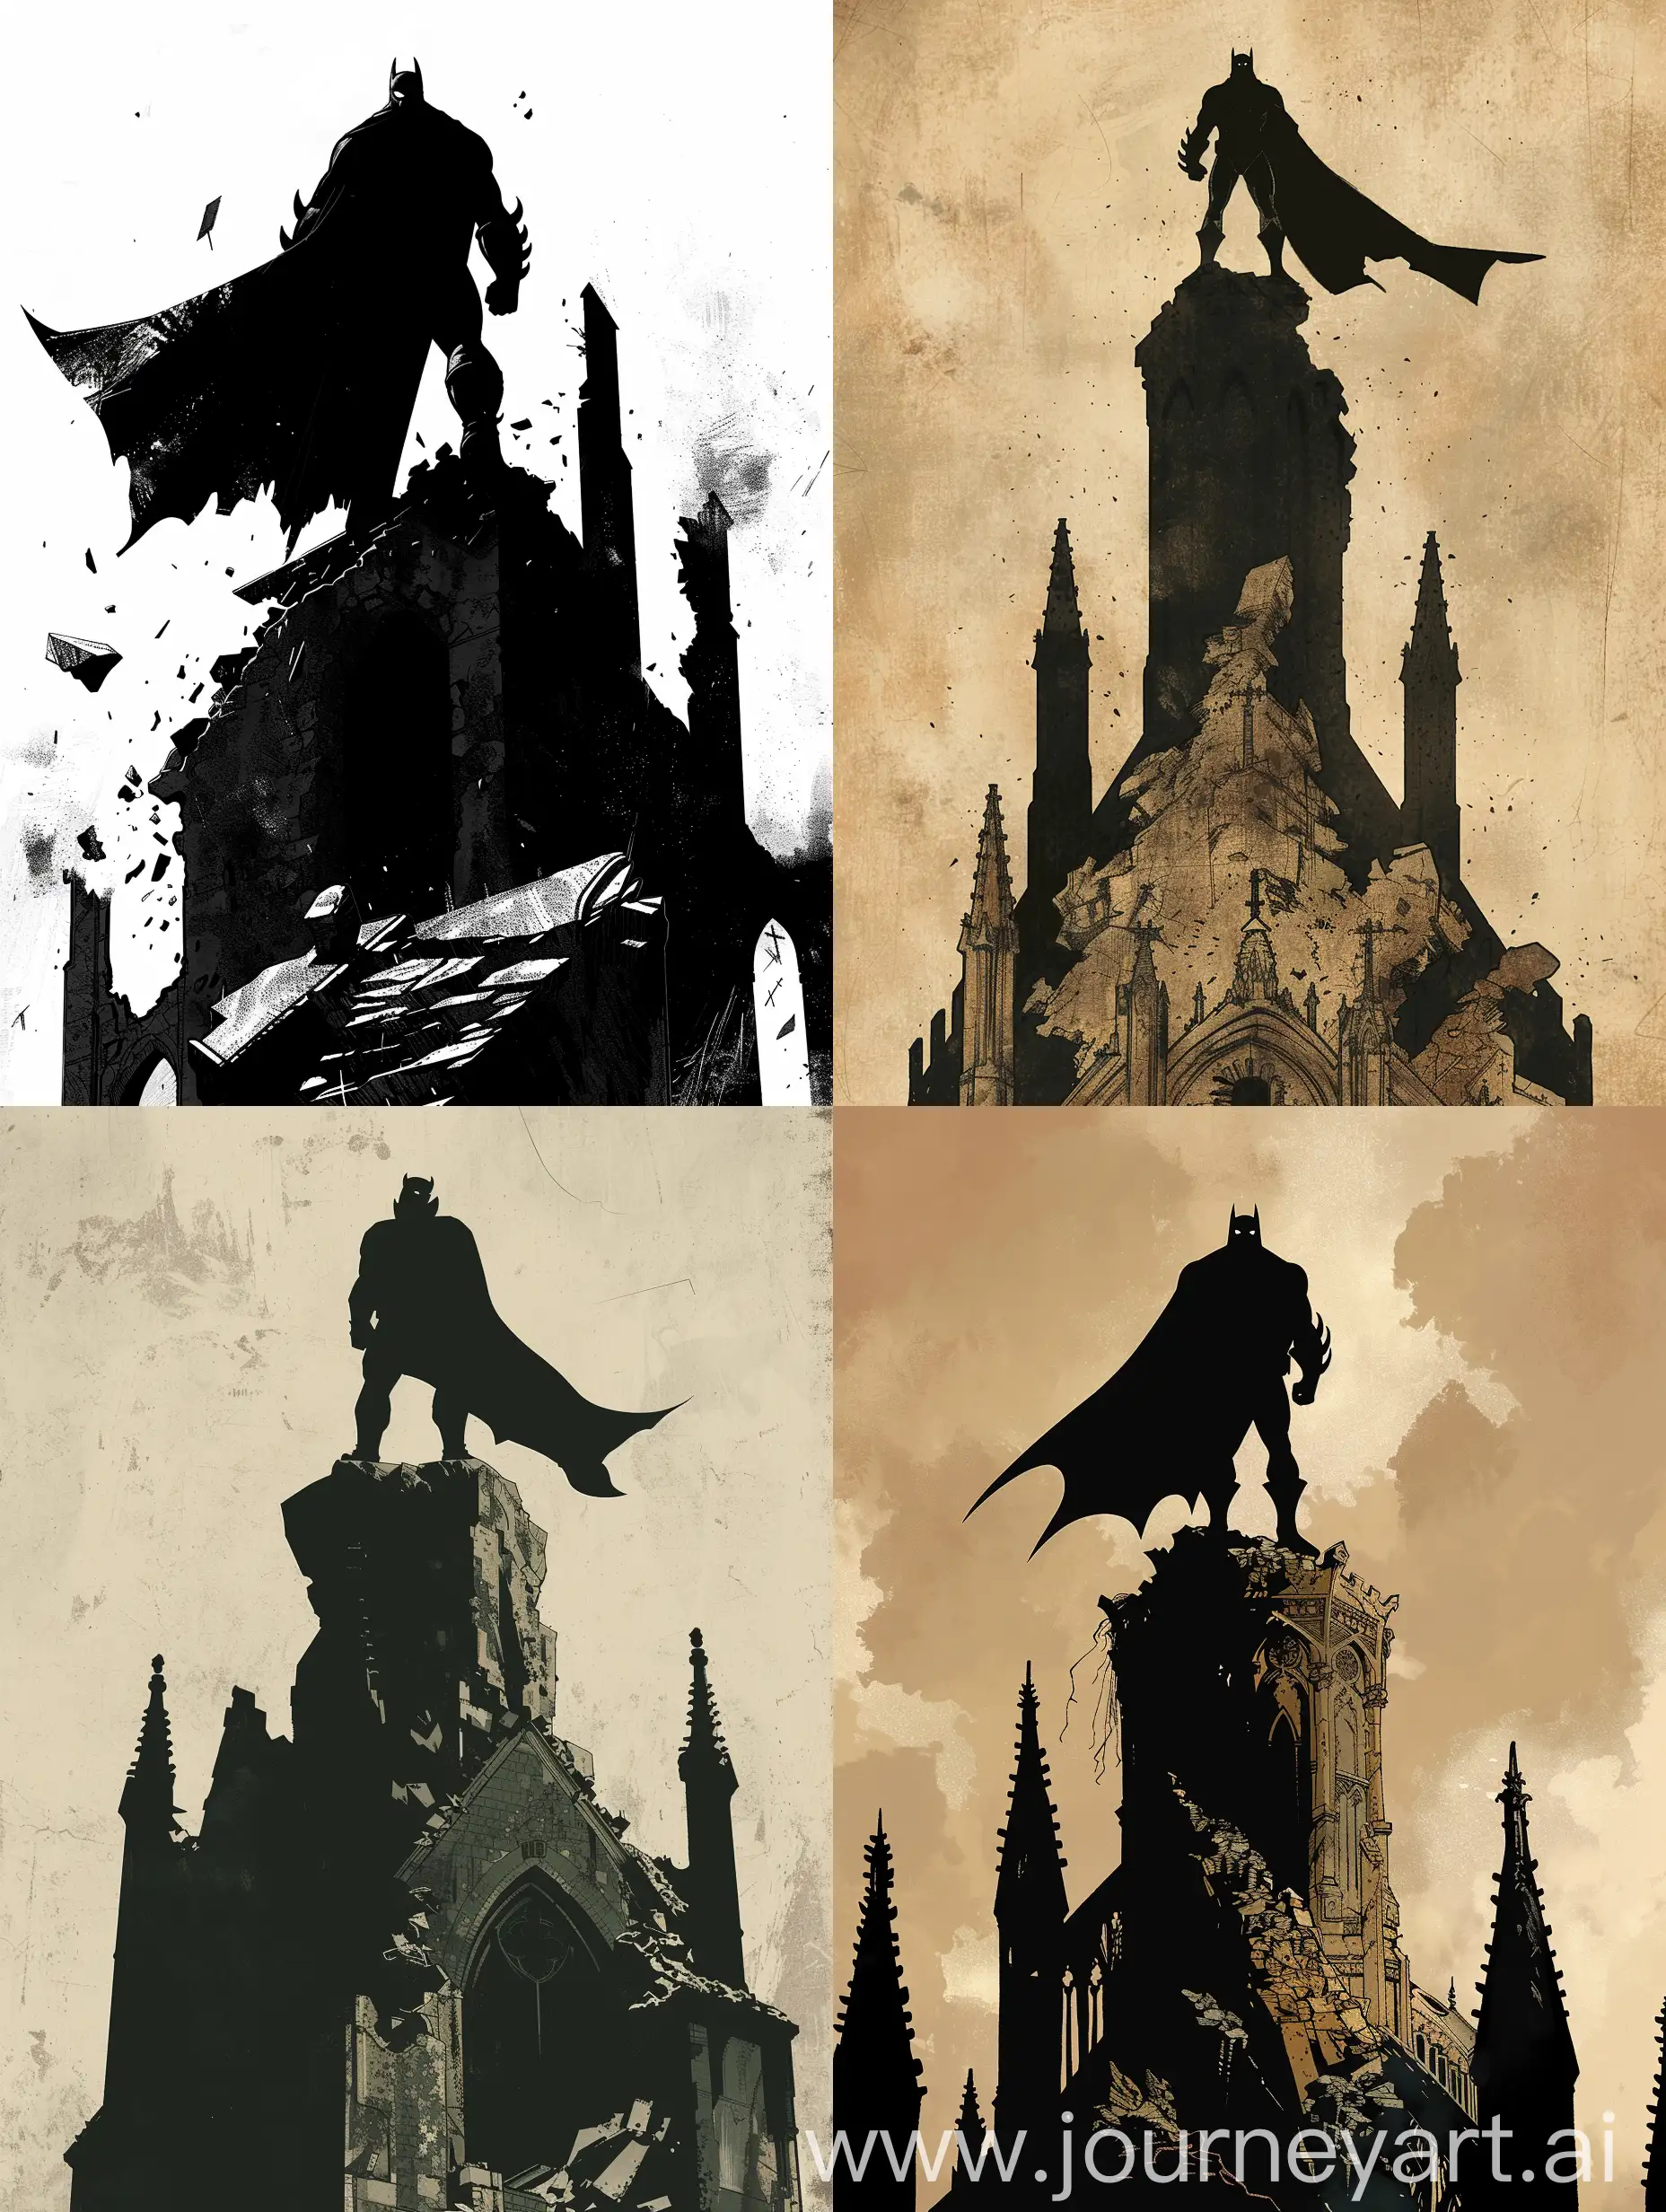 Illustrate a brooding superhero standing atop a crumbling gothic cathedral, with Mike Mignola's signature use of heavy shadows and stark contrasts. The character's silhouette should be bold and simple, yet convey a sense of mysterious power.